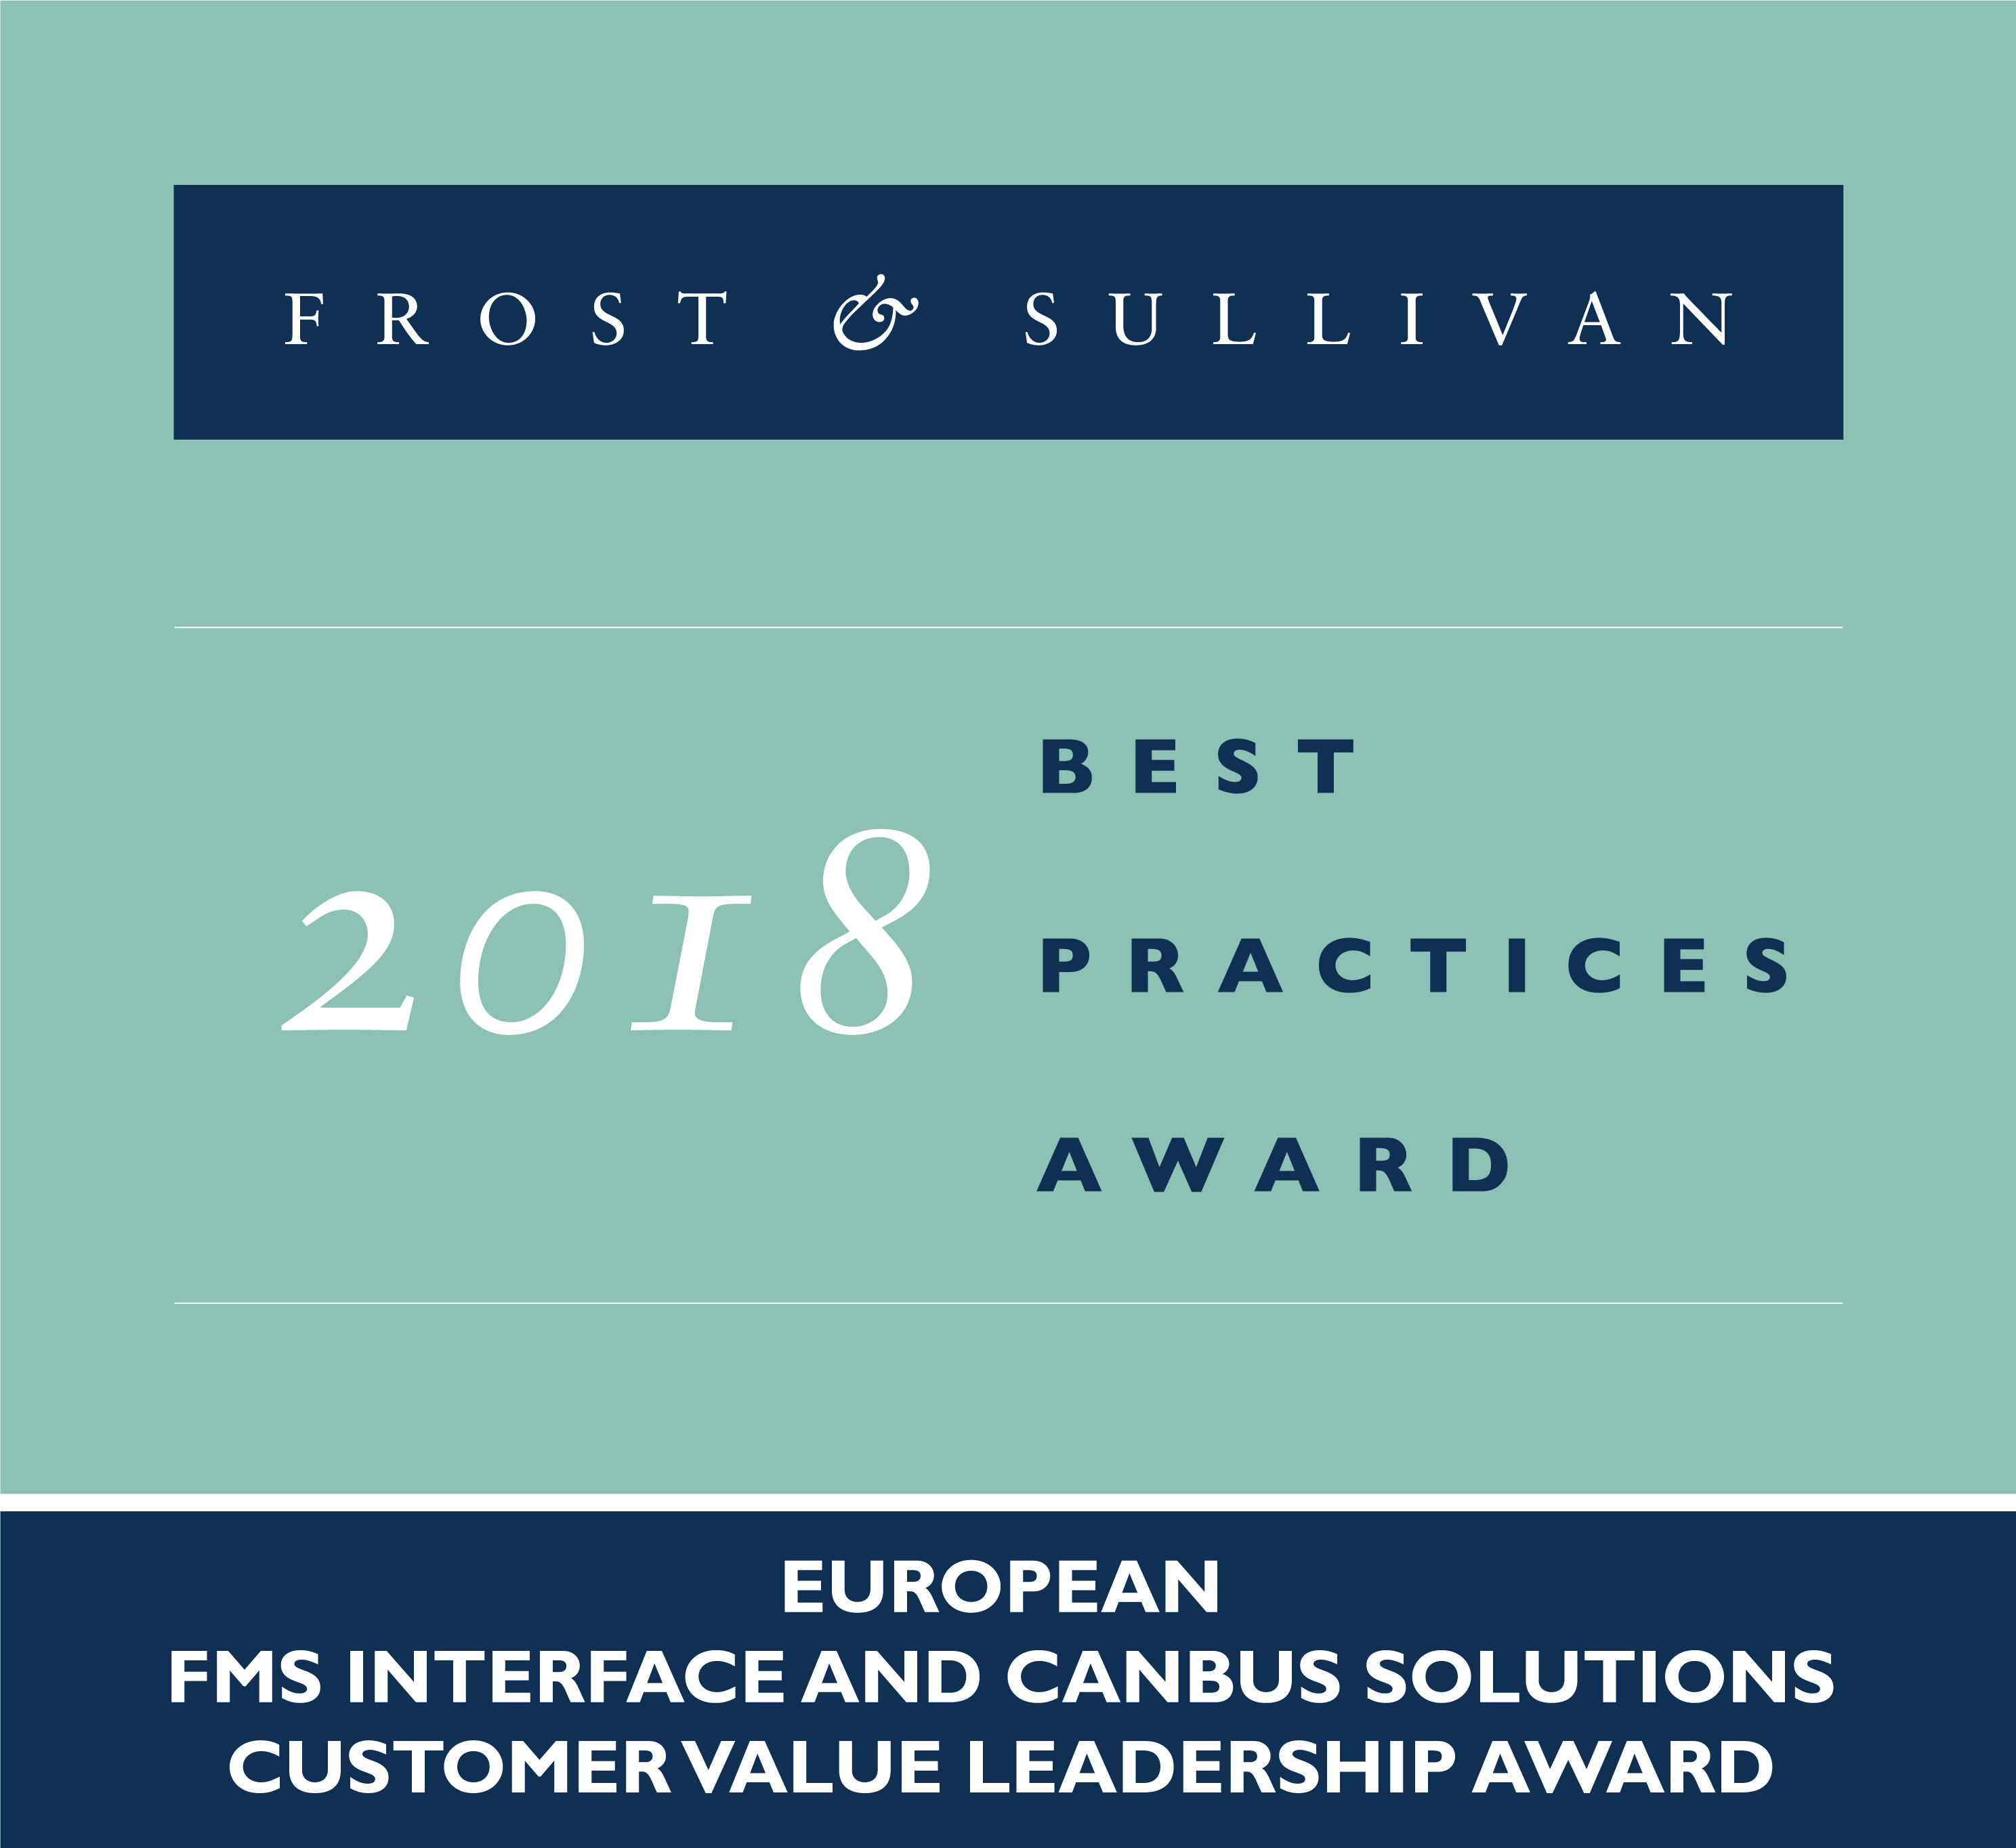 Award from Frost and Sullivan